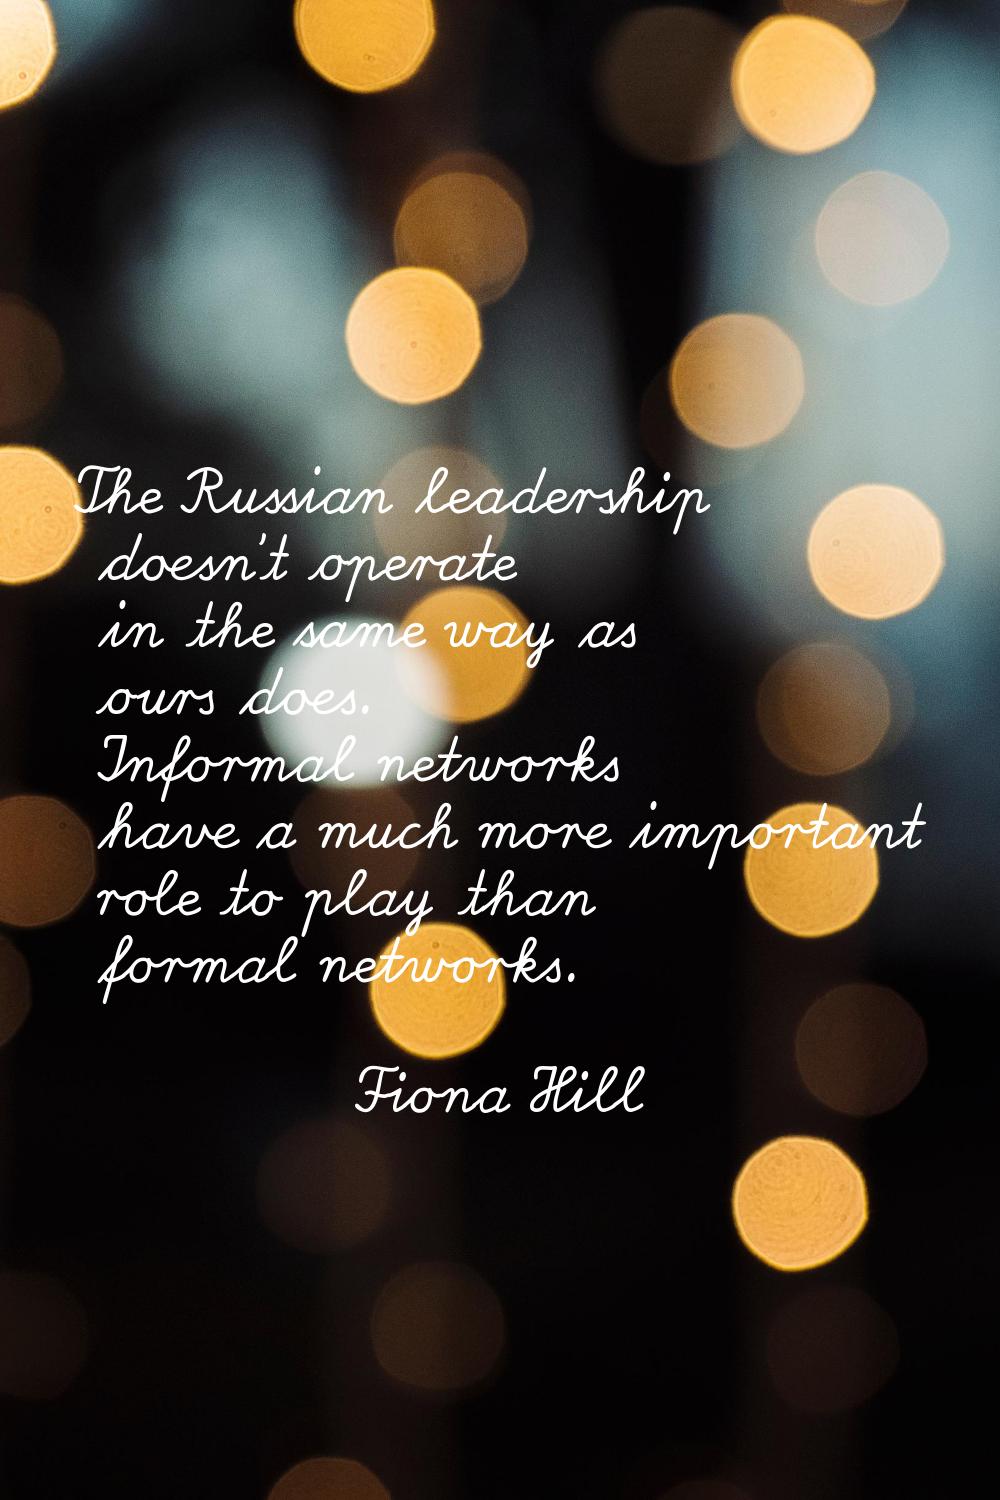 The Russian leadership doesn't operate in the same way as ours does. Informal networks have a much 